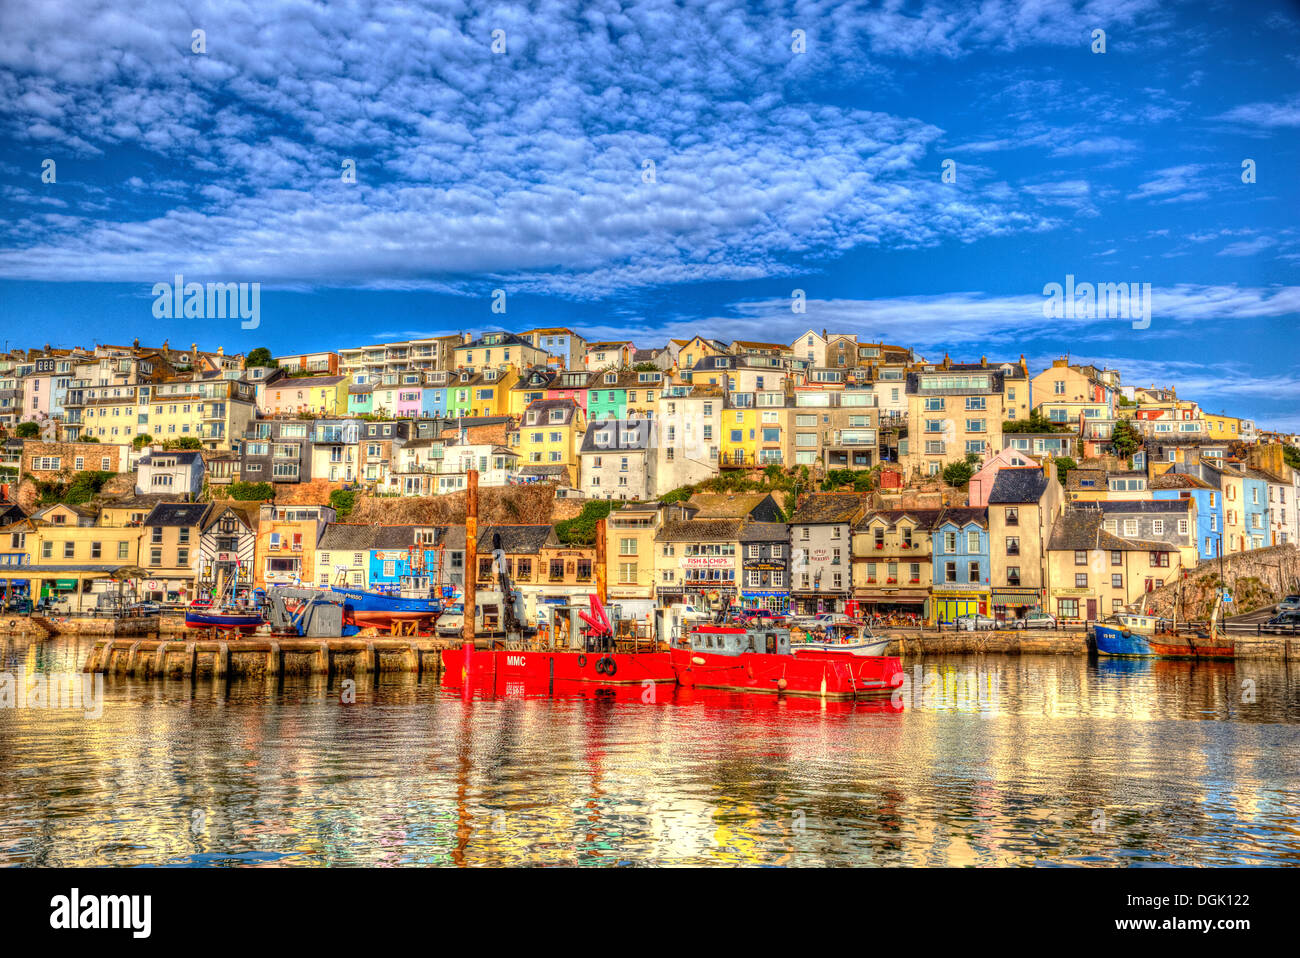 Brixham harbour Devon England UK English fishing scene with boats and blue sea and sky in HDR Stock Photo